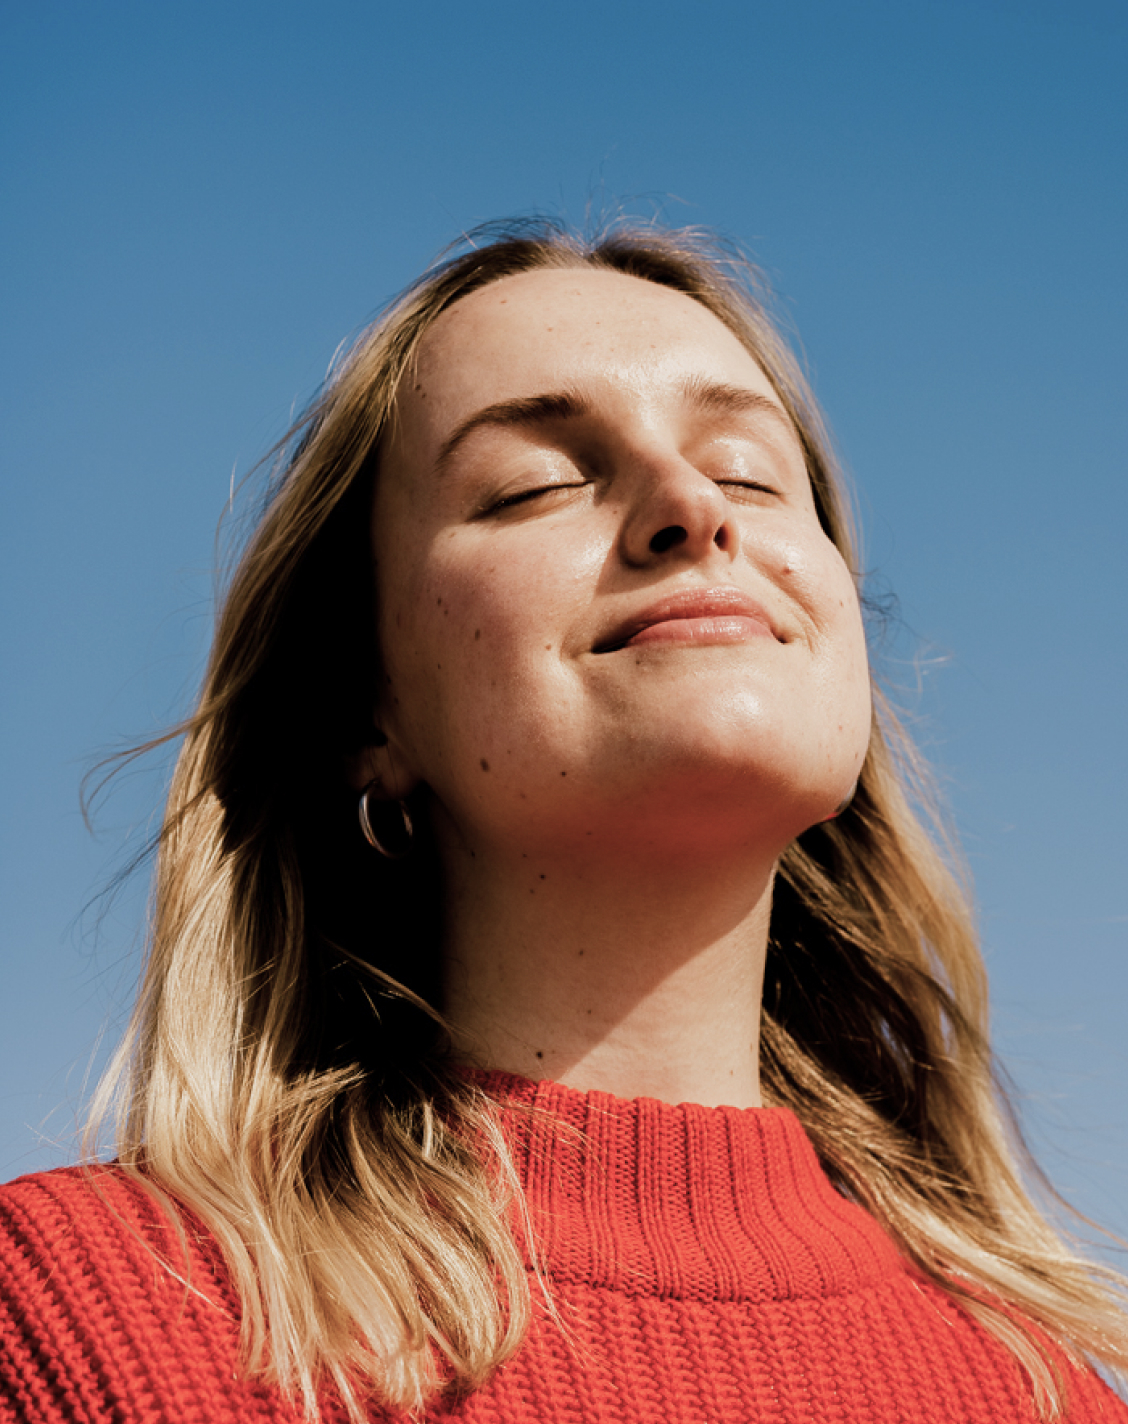 Woman smiling and tilting her head in front of a blue sky